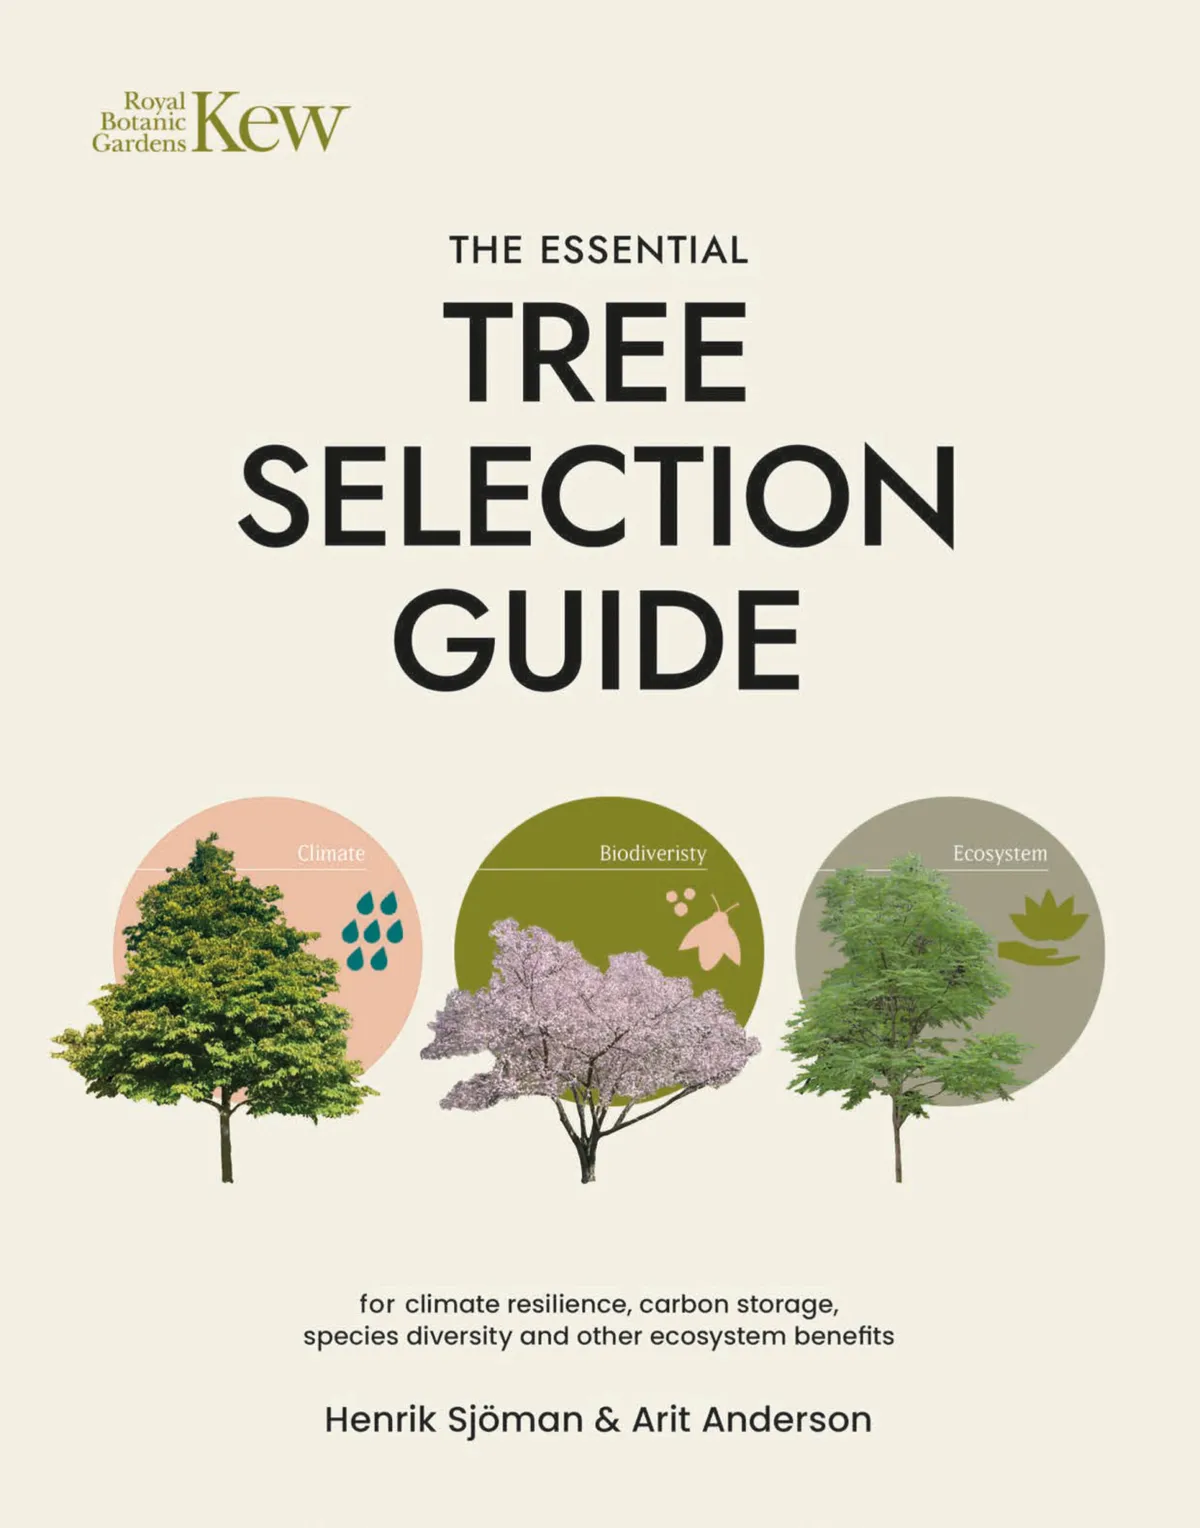 The Essential Tree Selection Guide by Henrik Sjoman & Arit Anderson